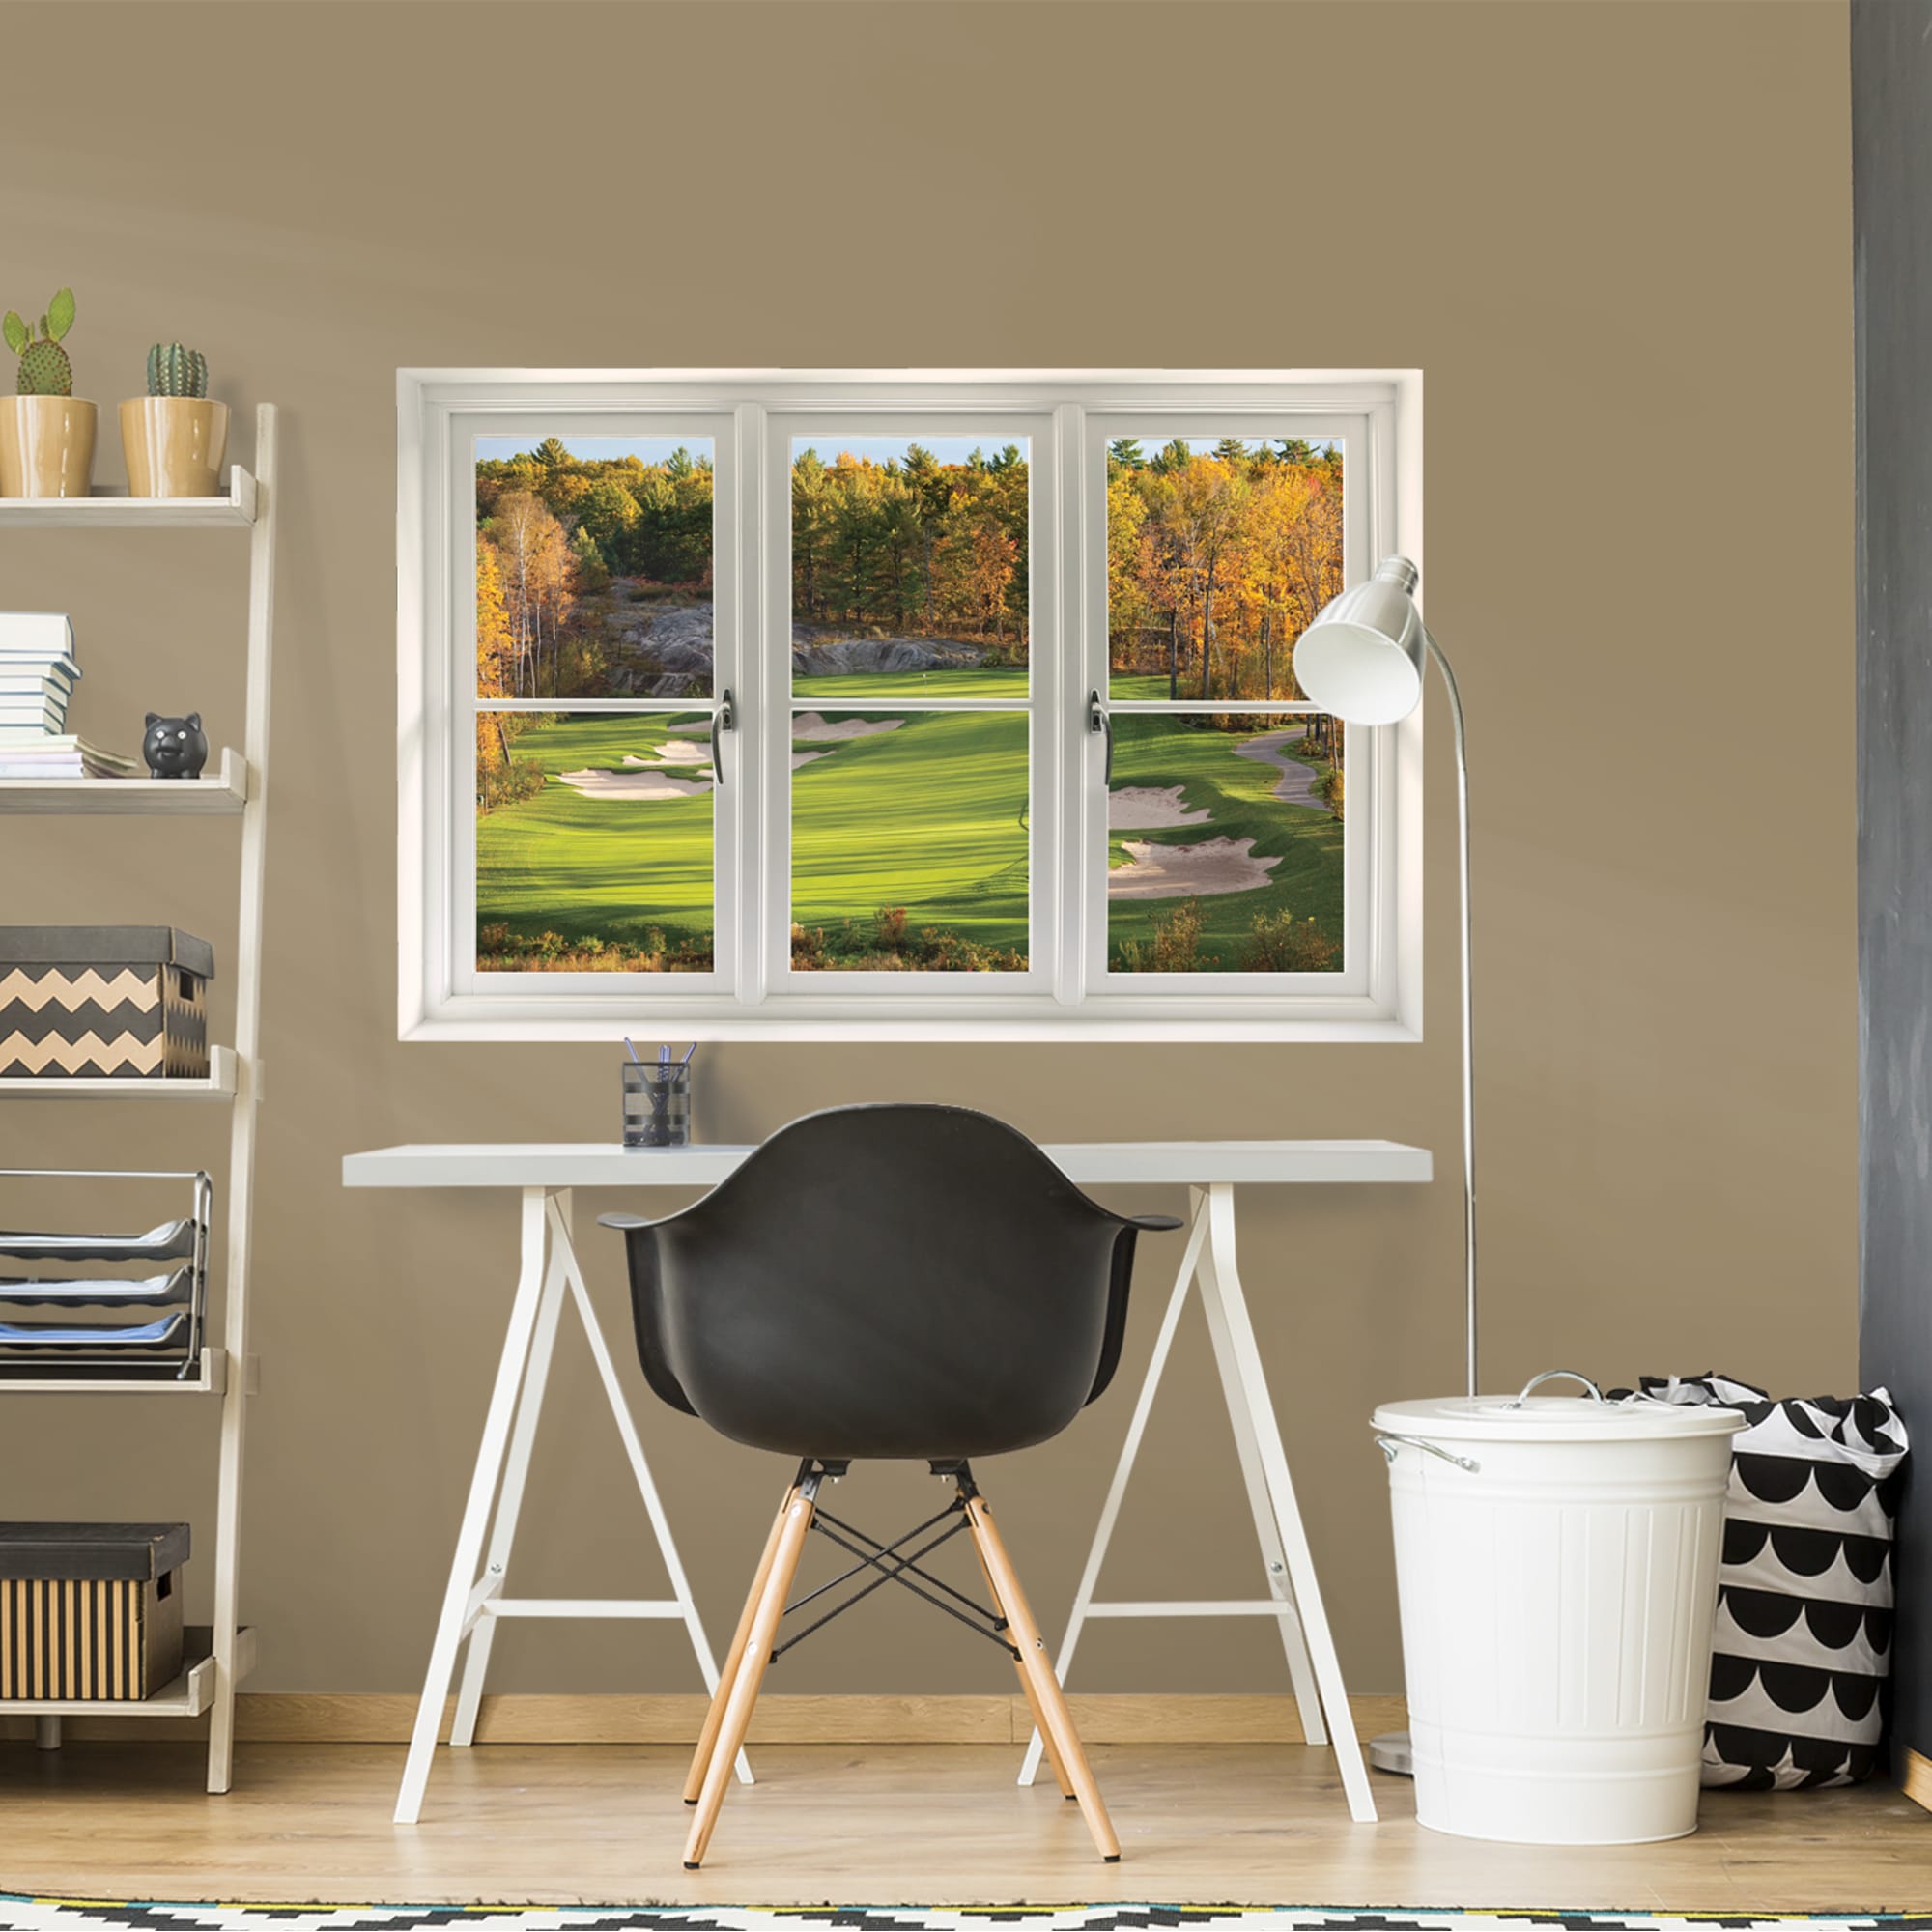 Instant Window: Fall Golf Tee Box - Removable Wall Graphic 51.0"W x 34.0"H by Fathead | Vinyl